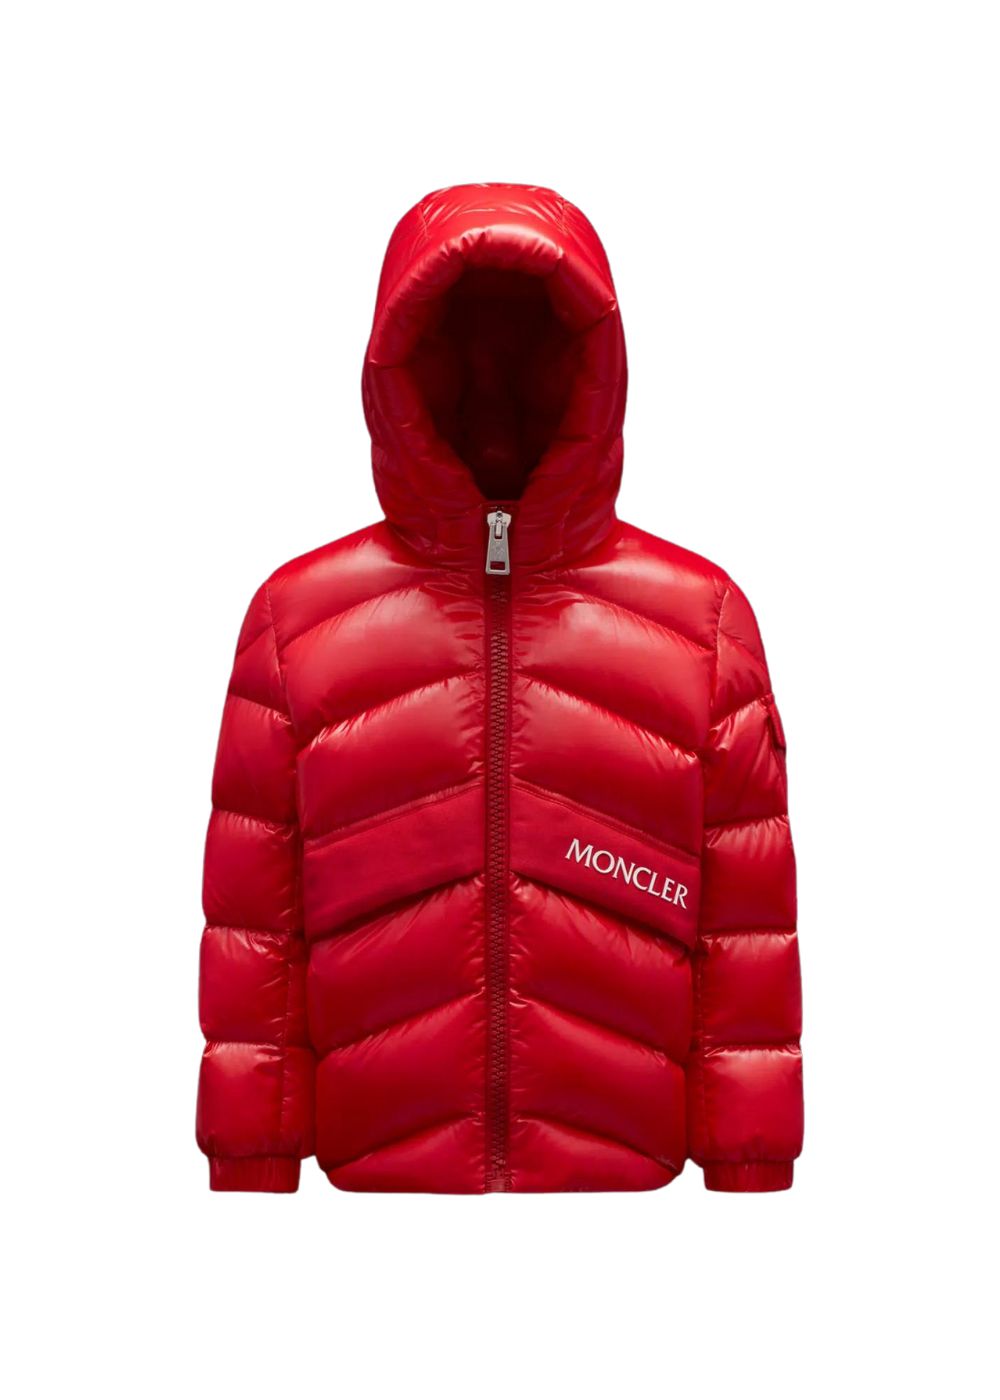 Featured image for “Moncler Giubbotto Groseiller Rosso”